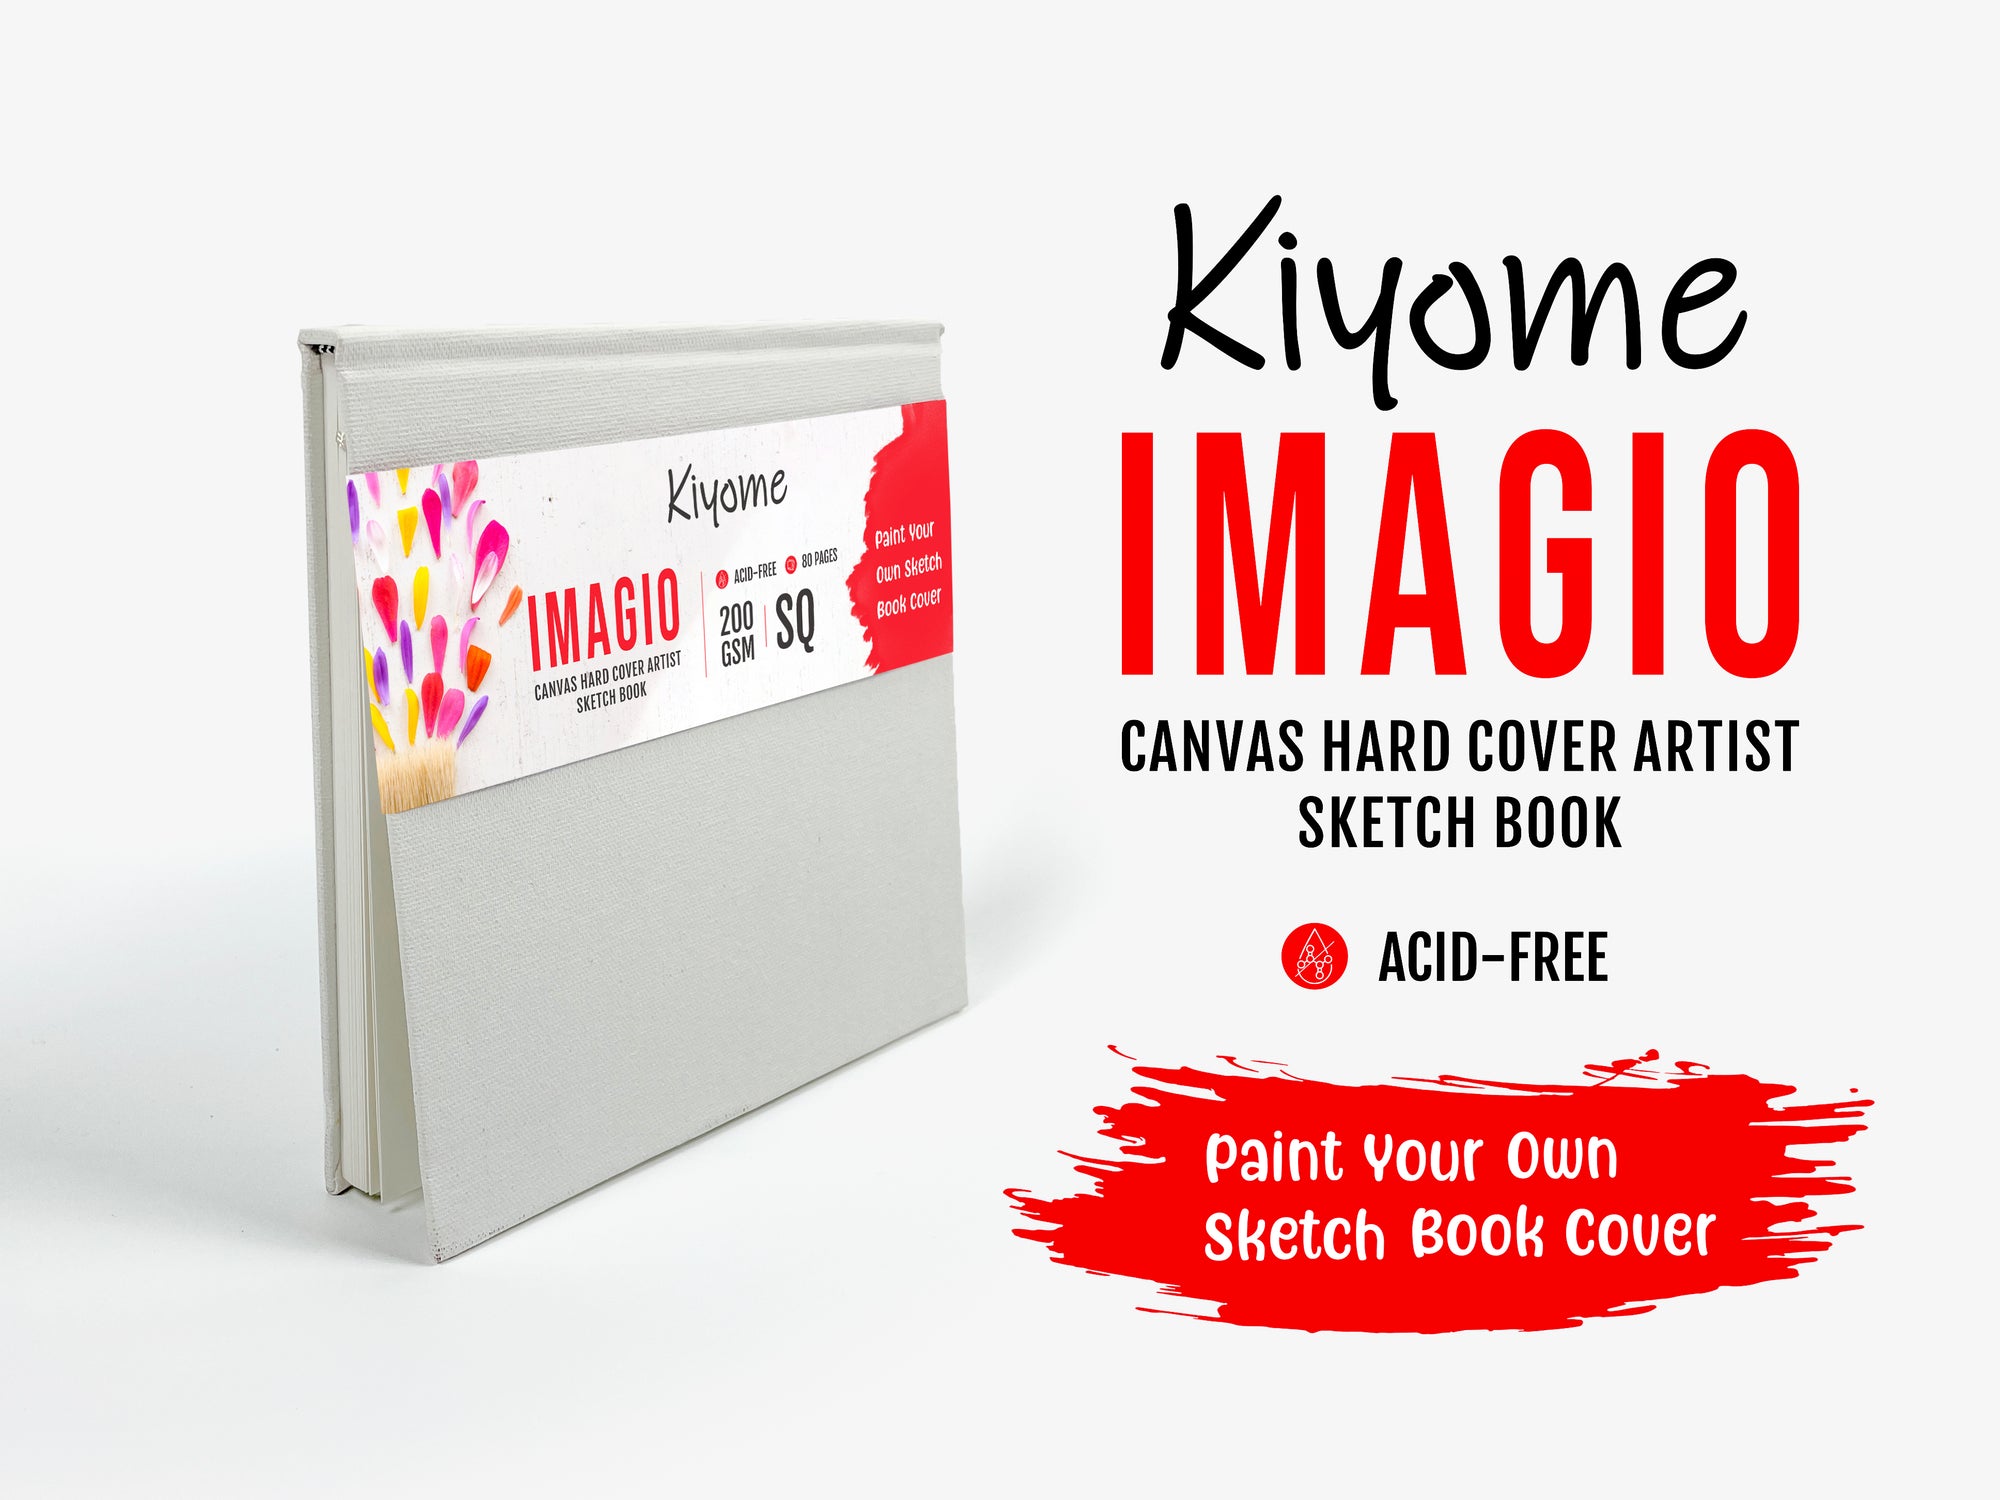 Kiyome Imagio Sketchbook | 200 GSM | Square Paper | Canvas Cover | 80 Sheets